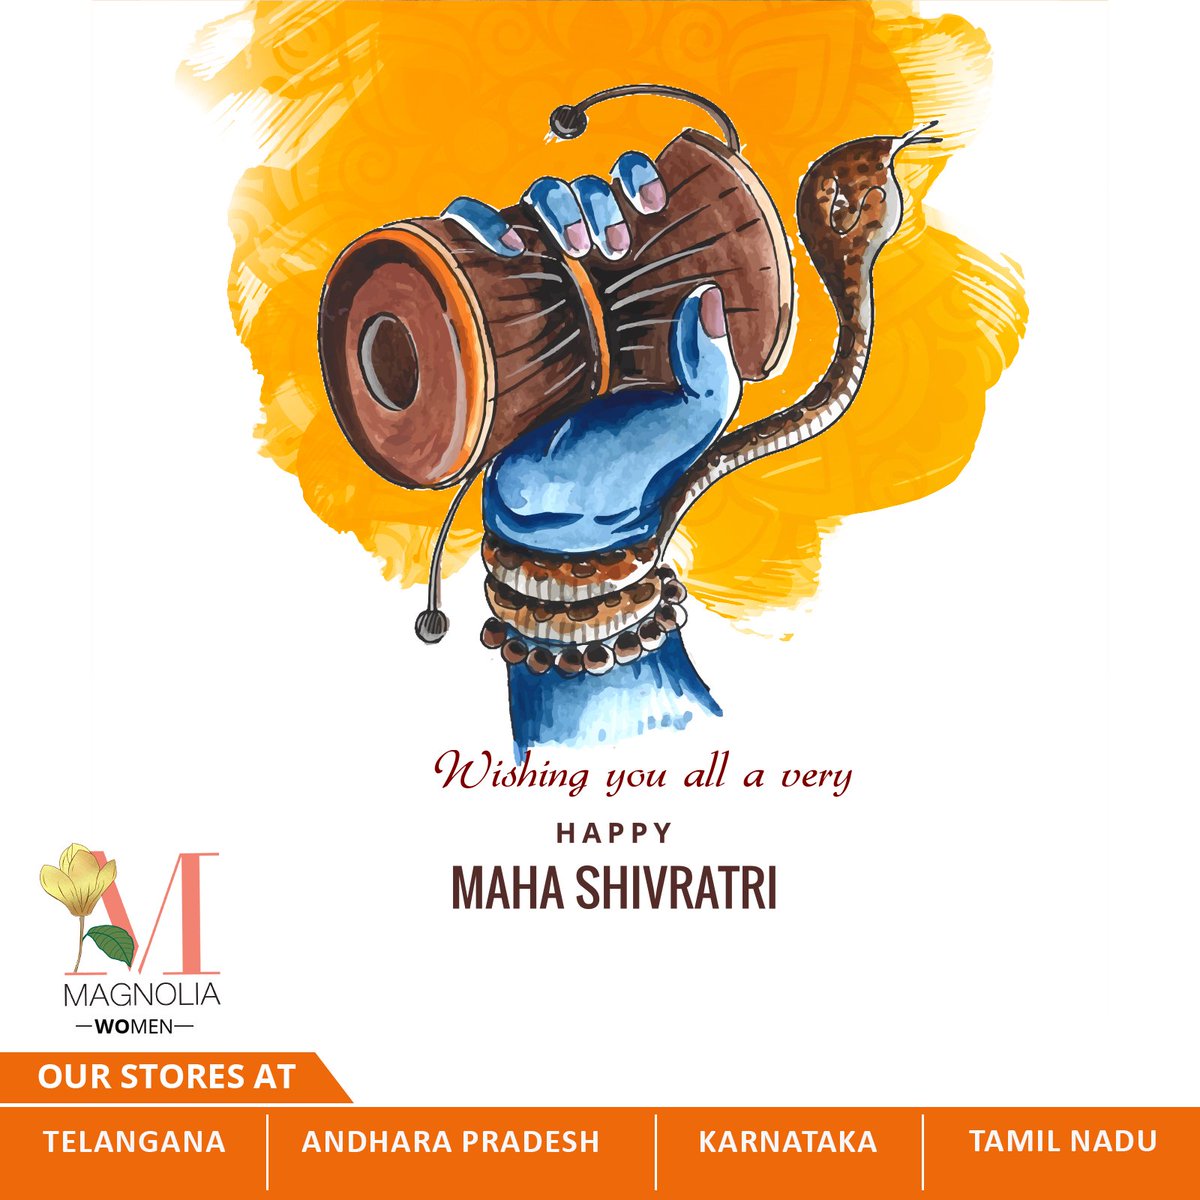 May the divine blessings of Lord Shiva be with you on 
this auspicious occasion of Mahashivratri.

Wishing you and your family a happy and 
prosperous celebration.

#MahaShivratri #Divine #Celebration #Festival
#themagnolia #PlaywithFashion
#womensstyle #womenswear #women